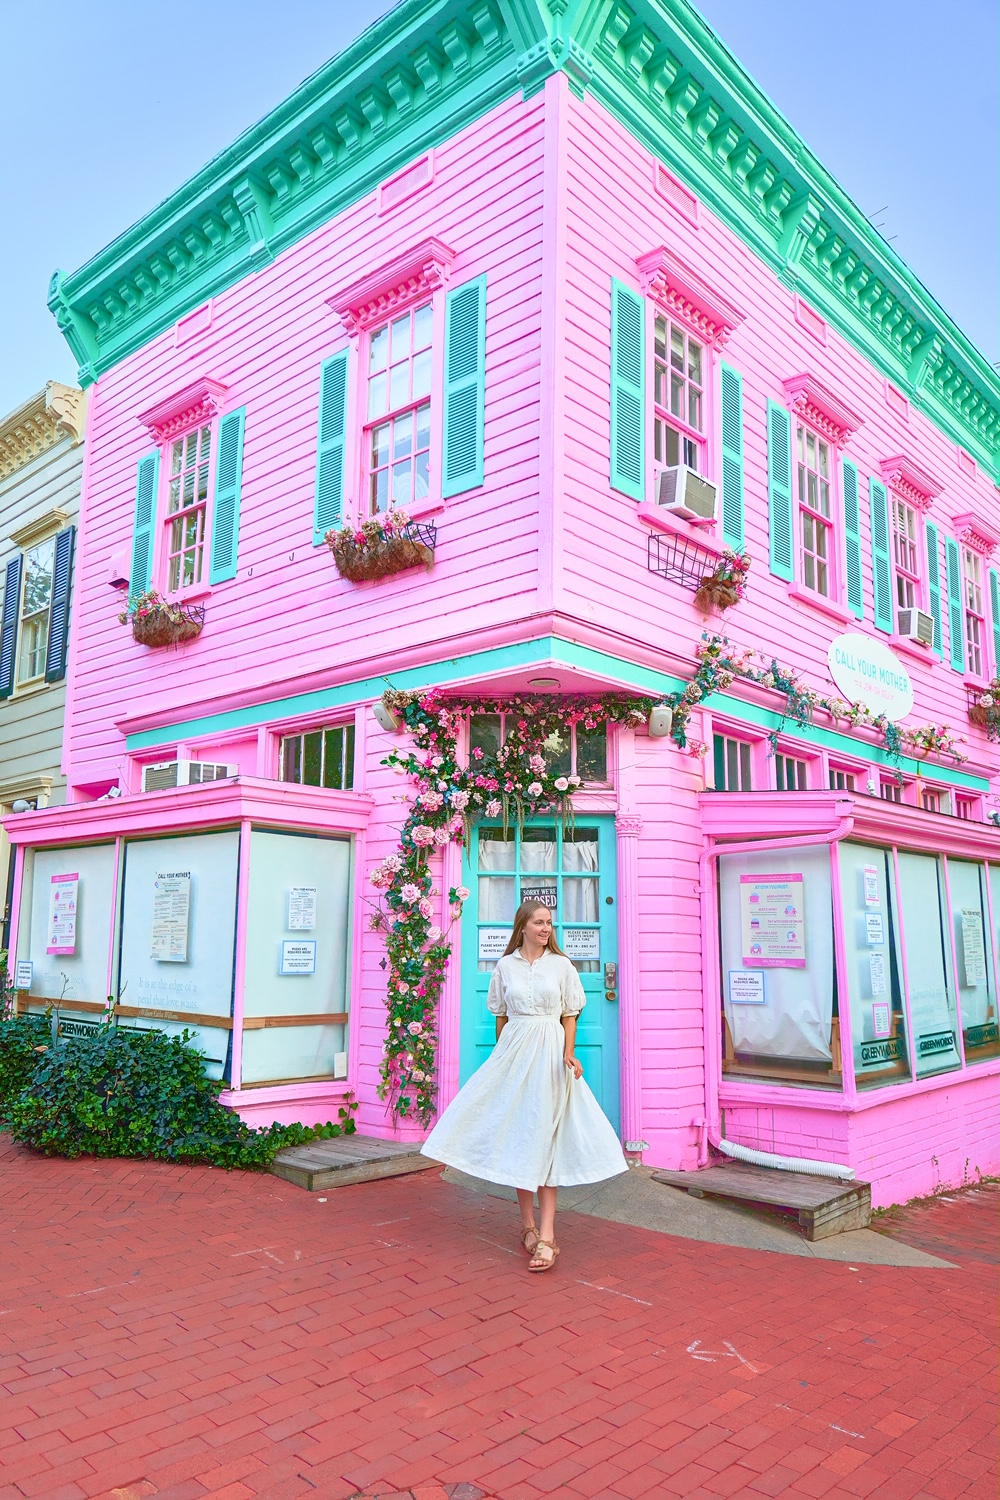 A woman in a white dress standing in front of a historic bright pink building in Georgetown. The building has bright blue trim. Georgetown is one of the best things to do in Washington DC.